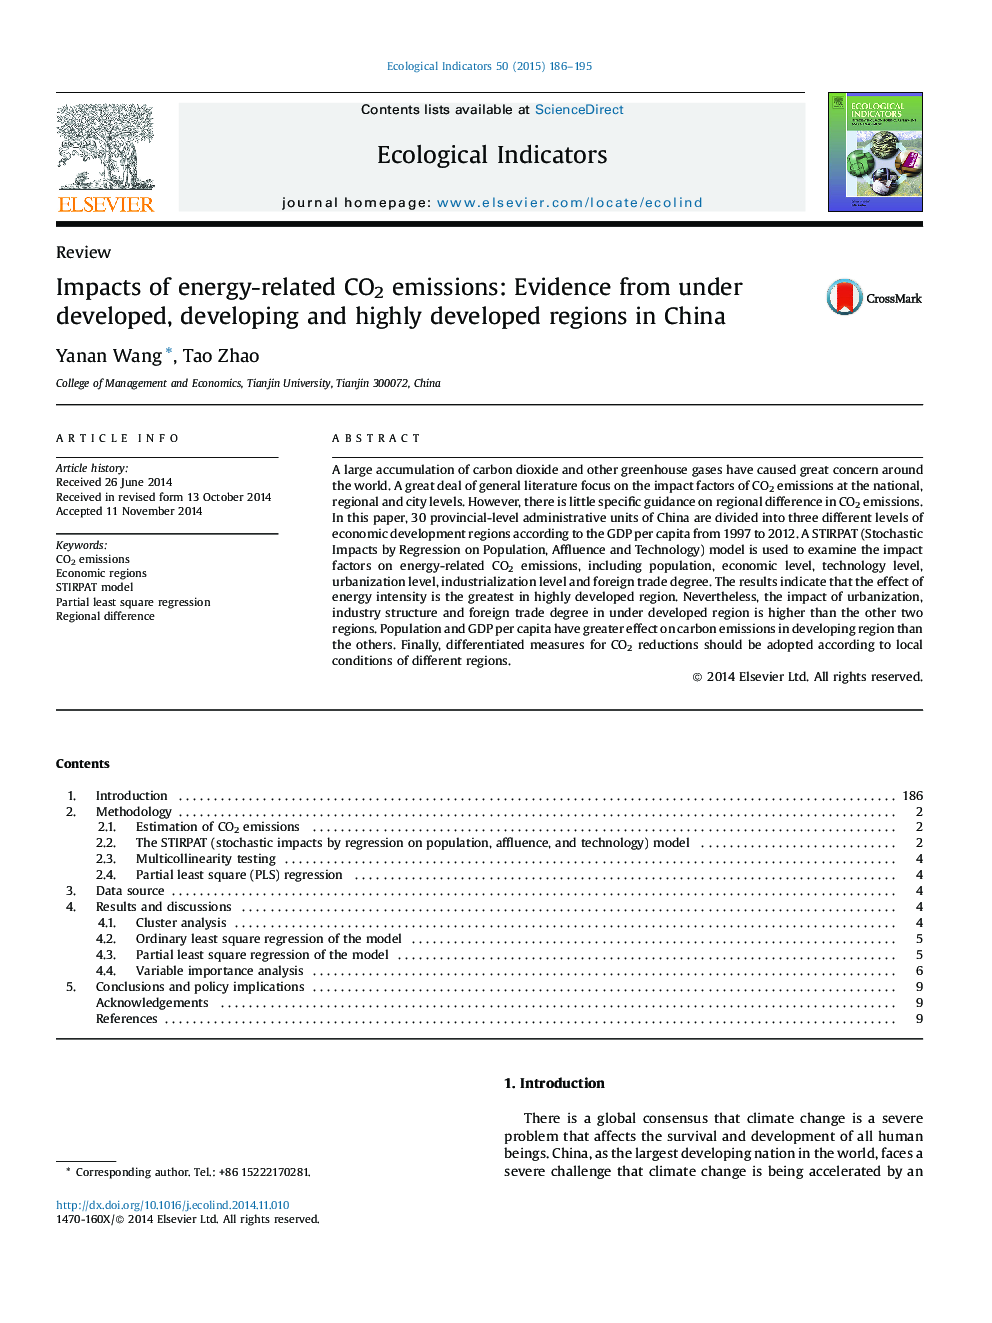 ReviewImpacts of energy-related CO2 emissions: Evidence from under developed, developing and highly developed regions in China